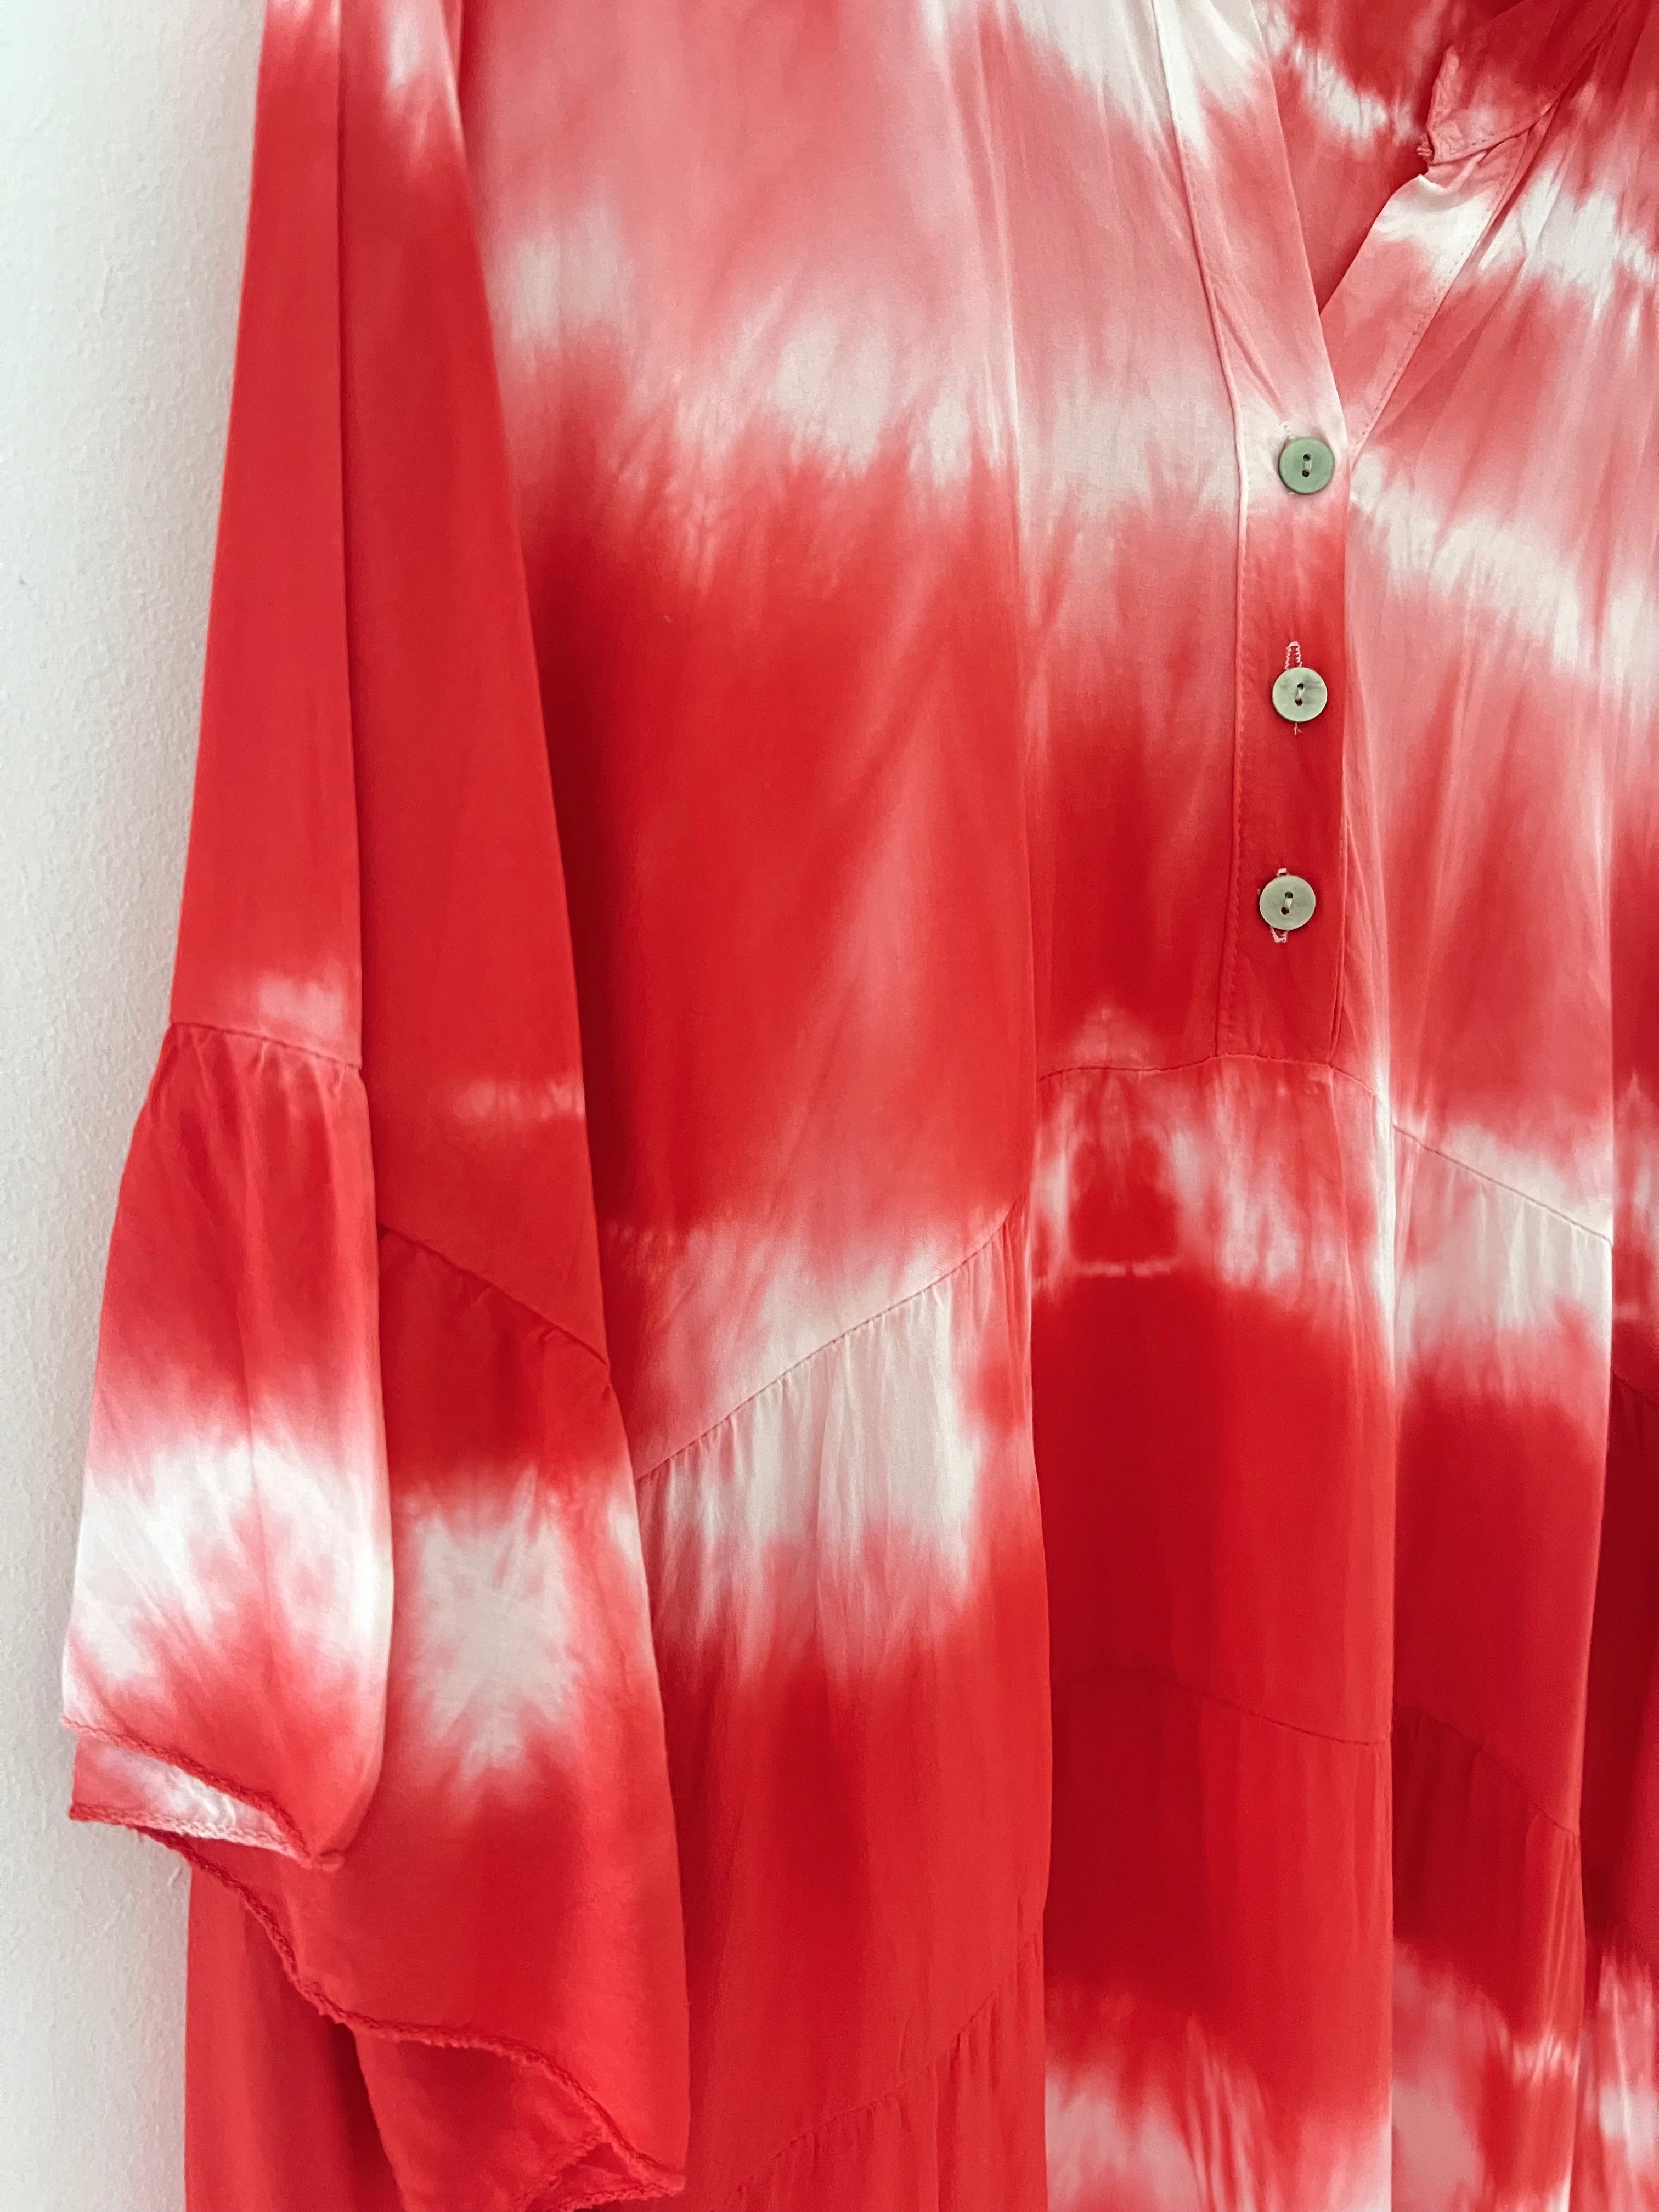 Tie Dye Dress in Coral Red